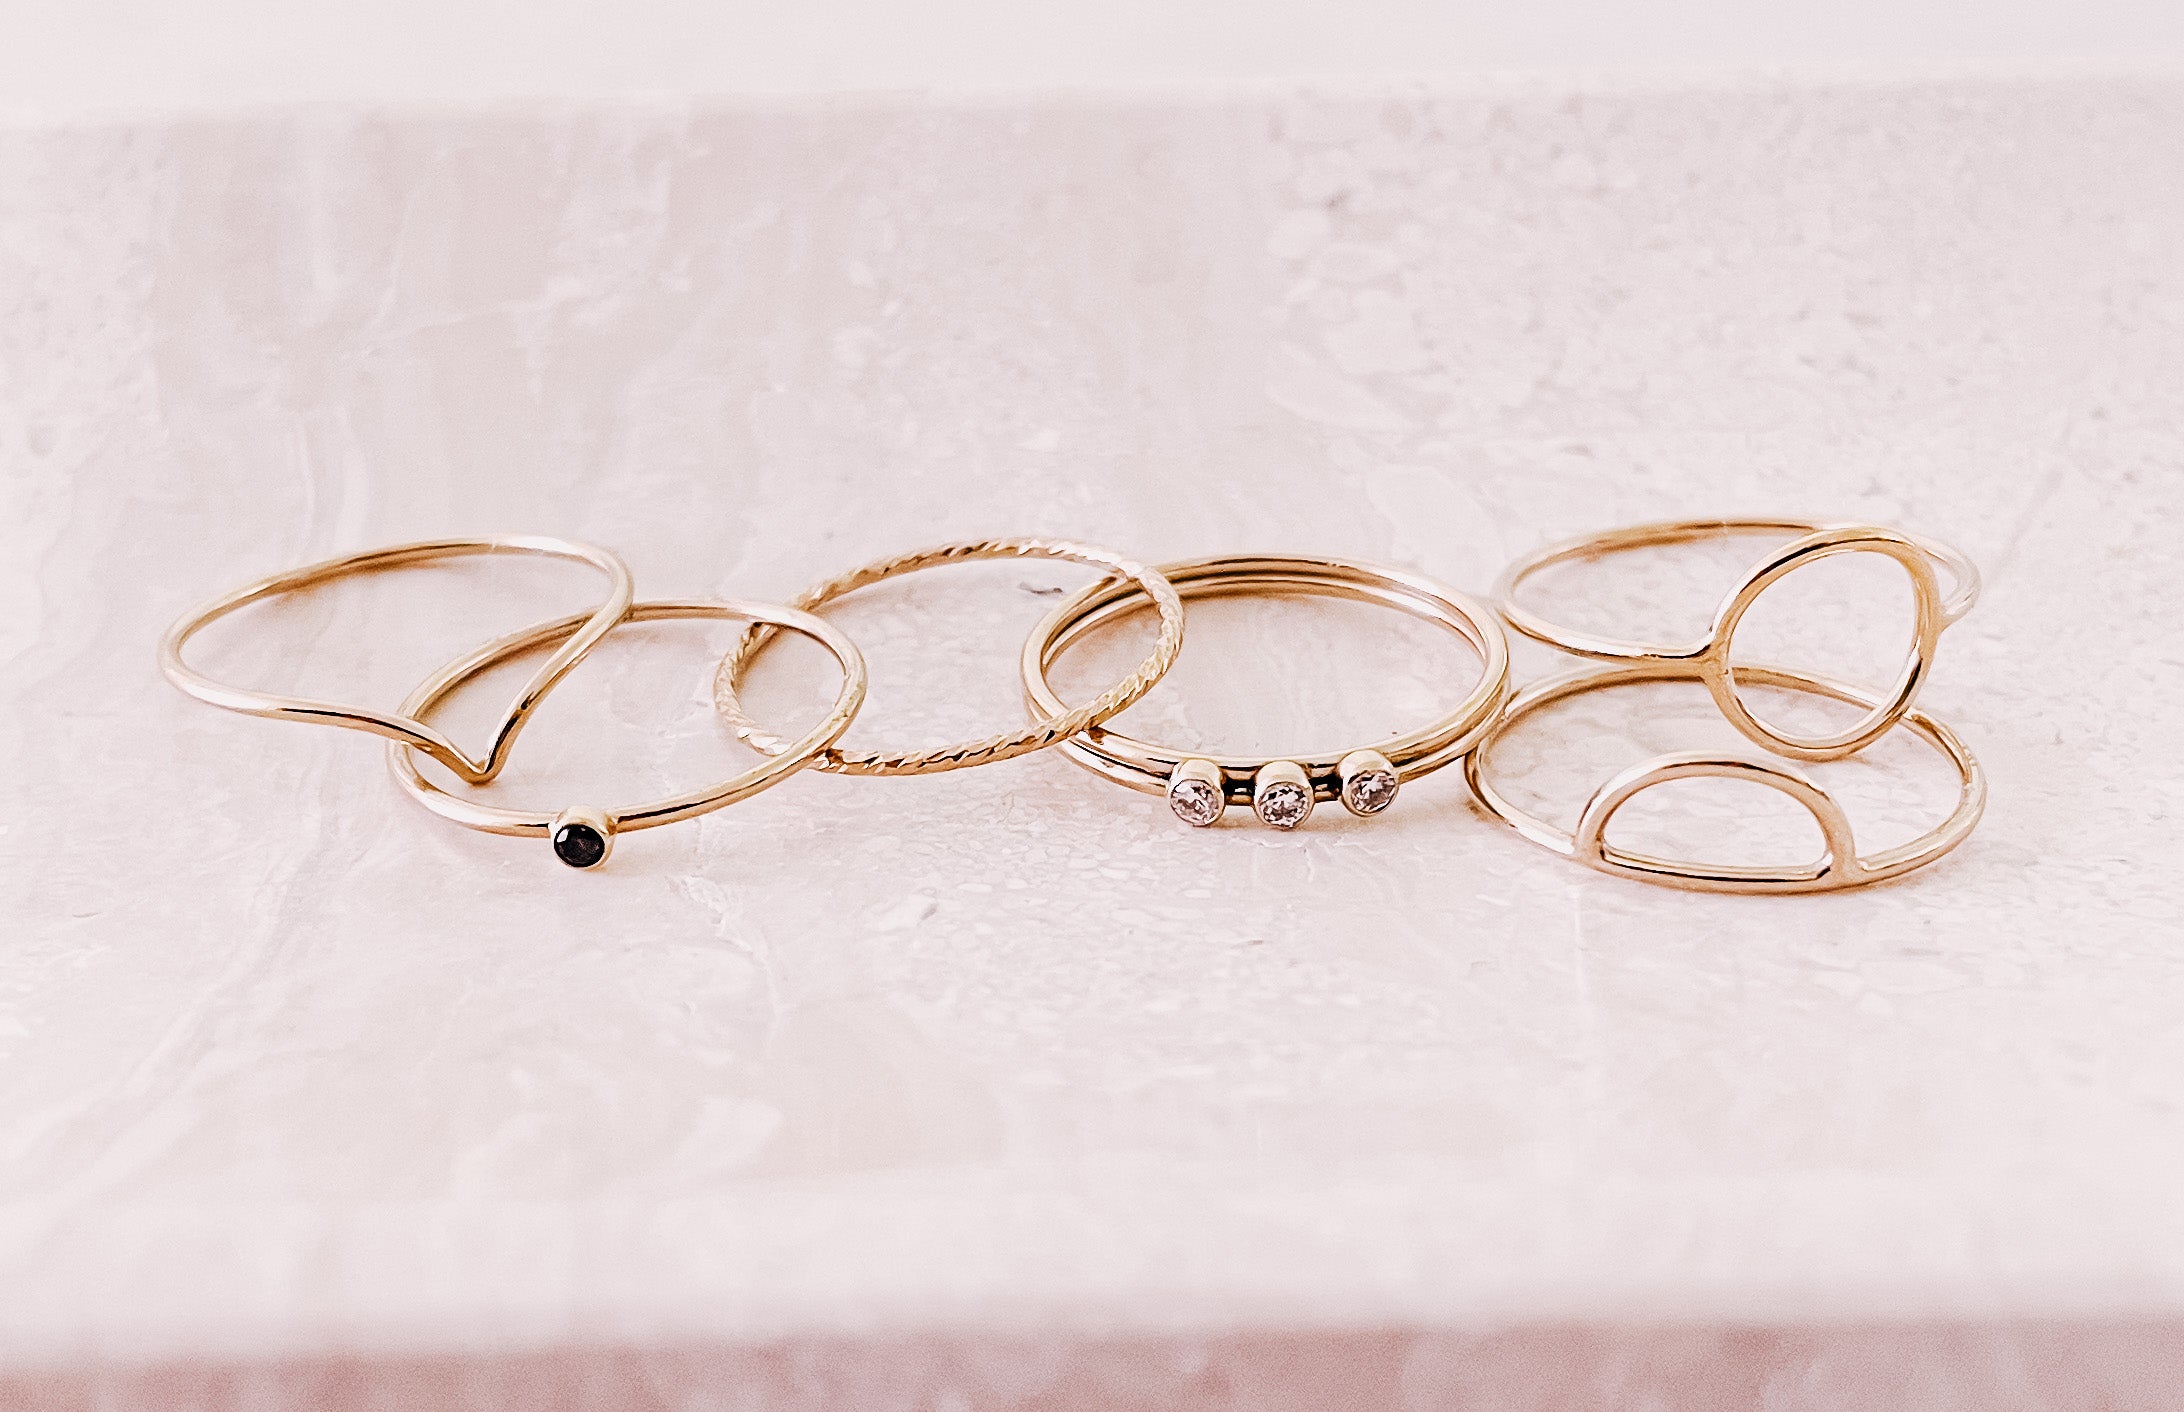 Gold Filled stacking rings on a jewellery tray by lady startup Australian jewellery label, AW Boutique.